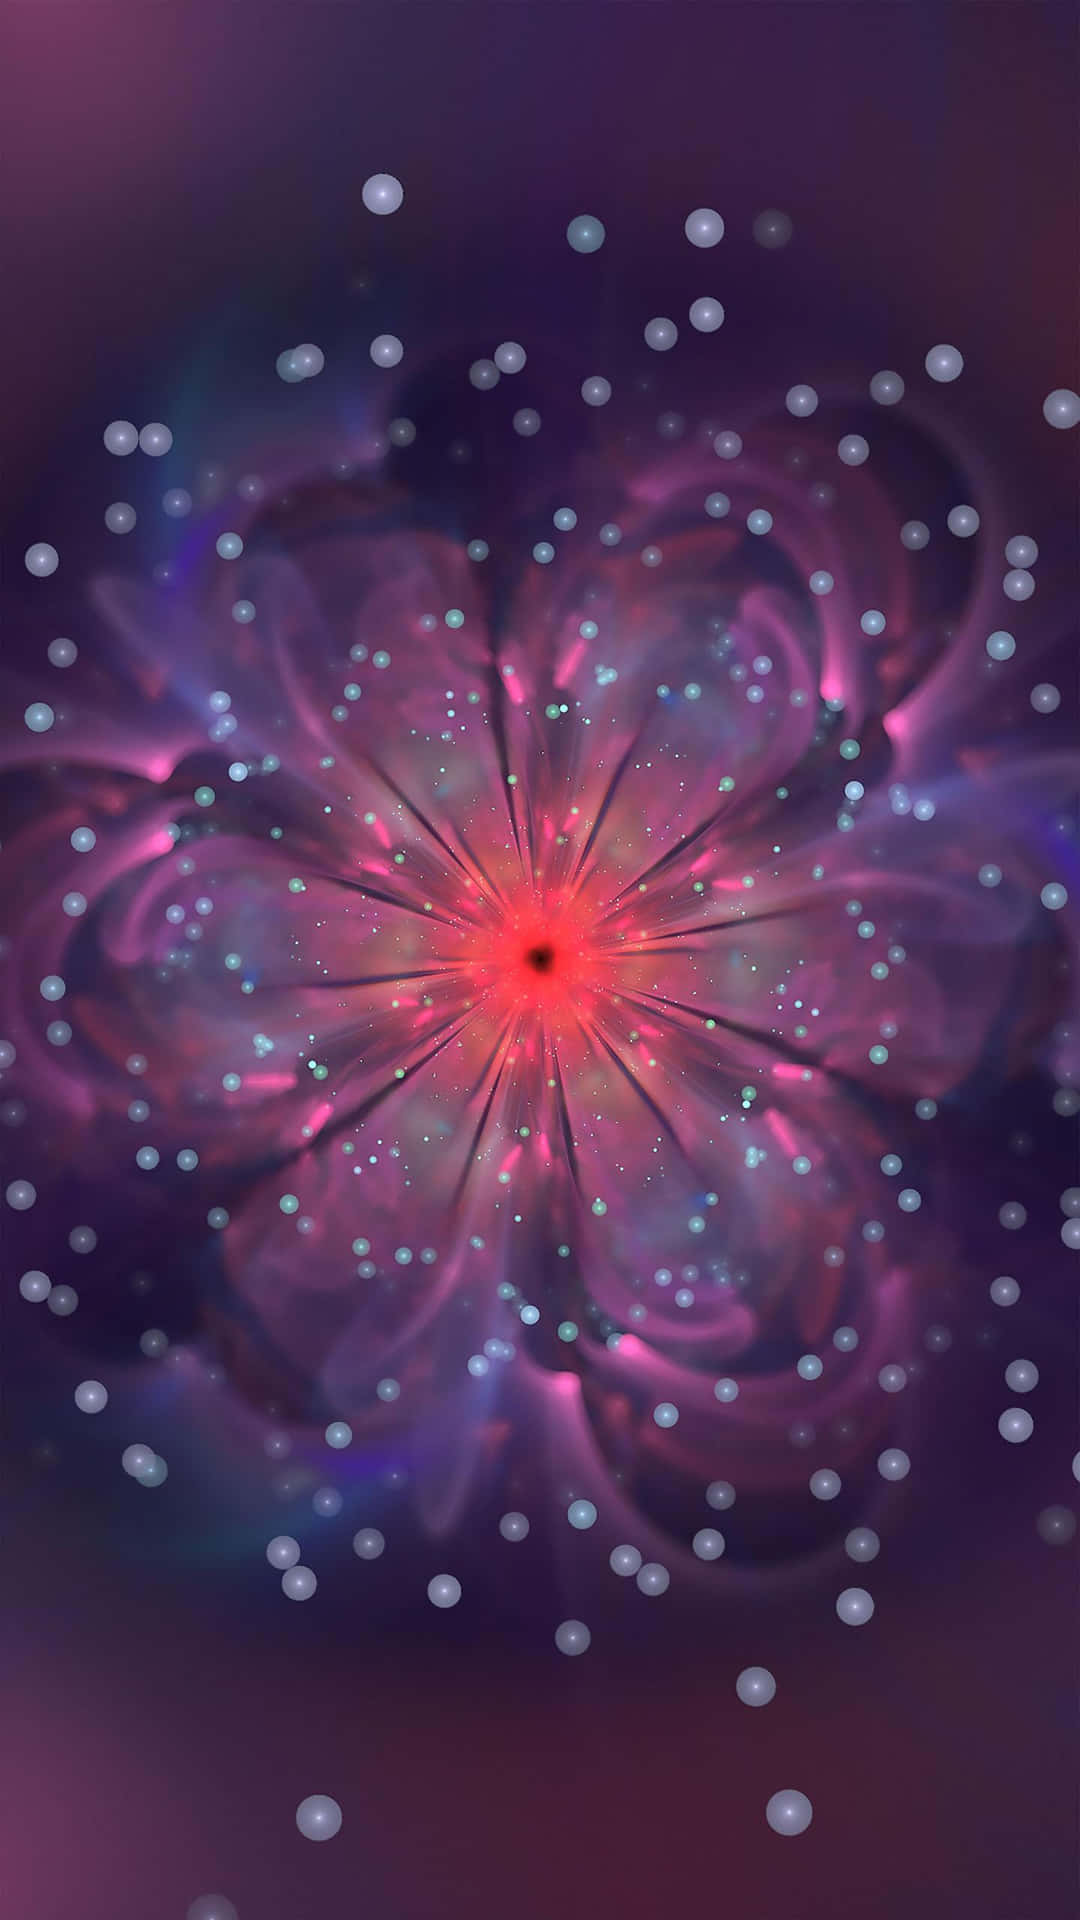 A Purple Flower With A Star In The Middle Wallpaper